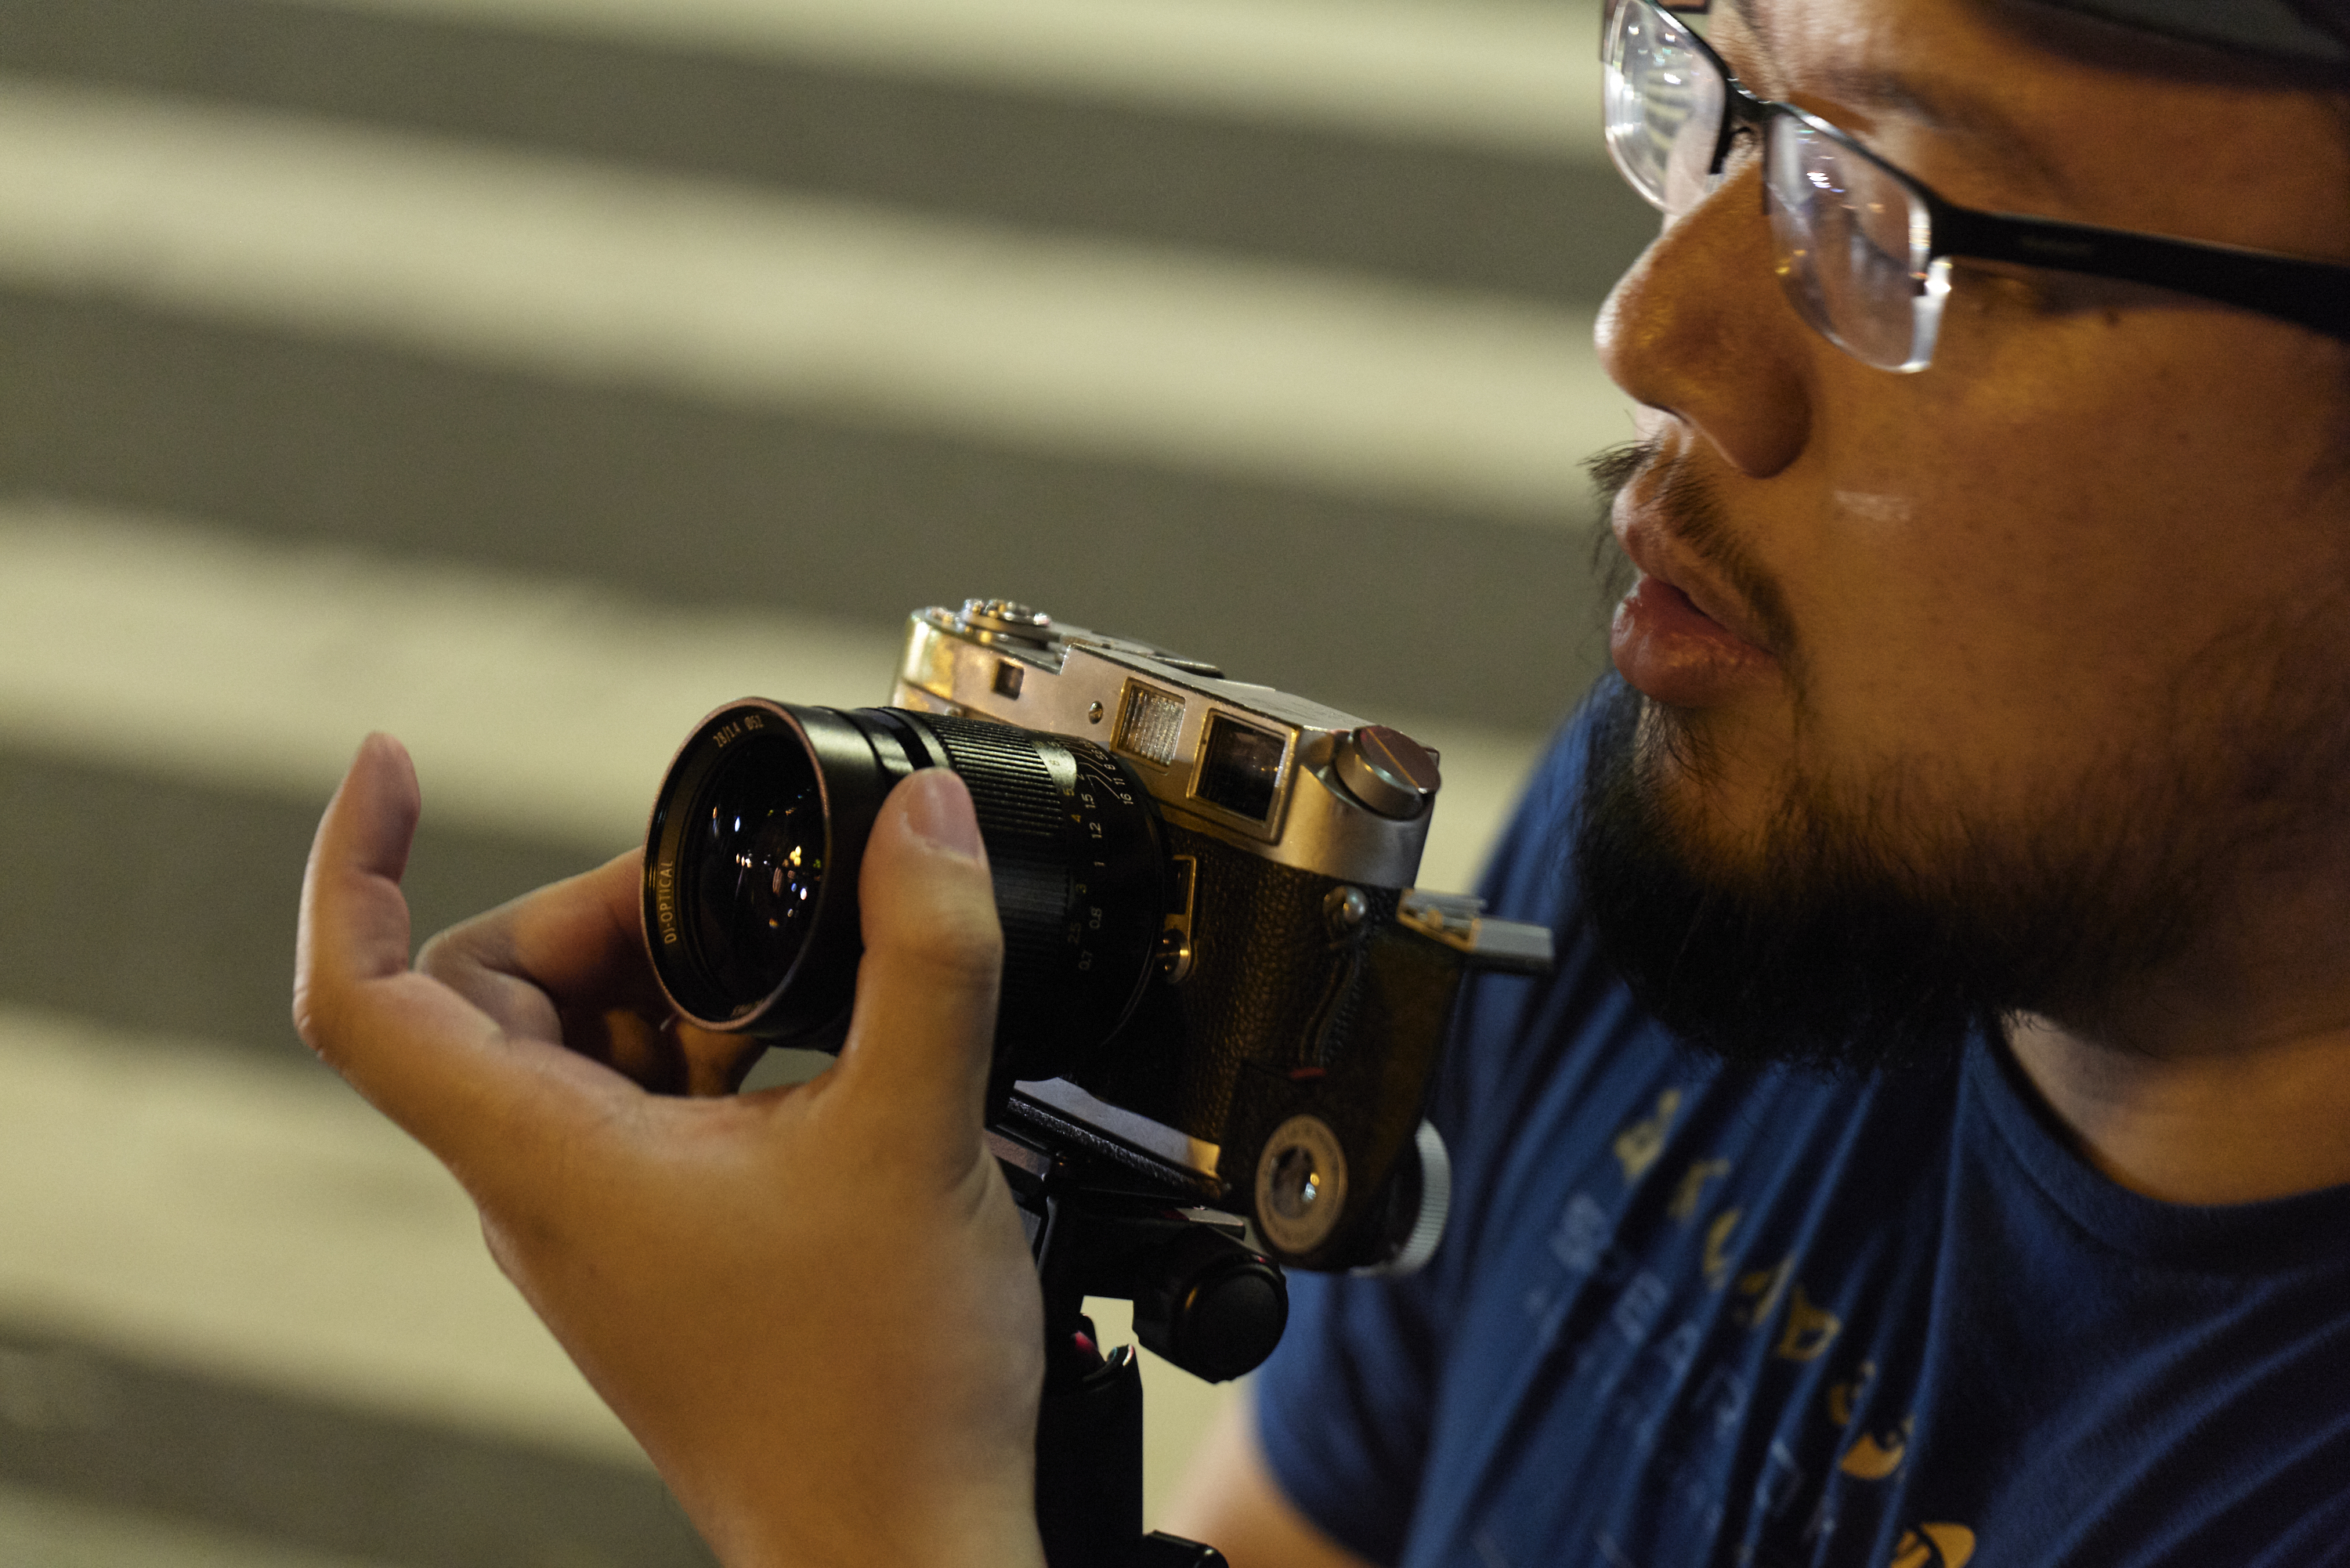 Chris Gampat The Phoblographer Panasonic S1R Review final photos f4, ISO 6400, 1-15s,DC-S1R, LUMIX S 24-105-F4 1